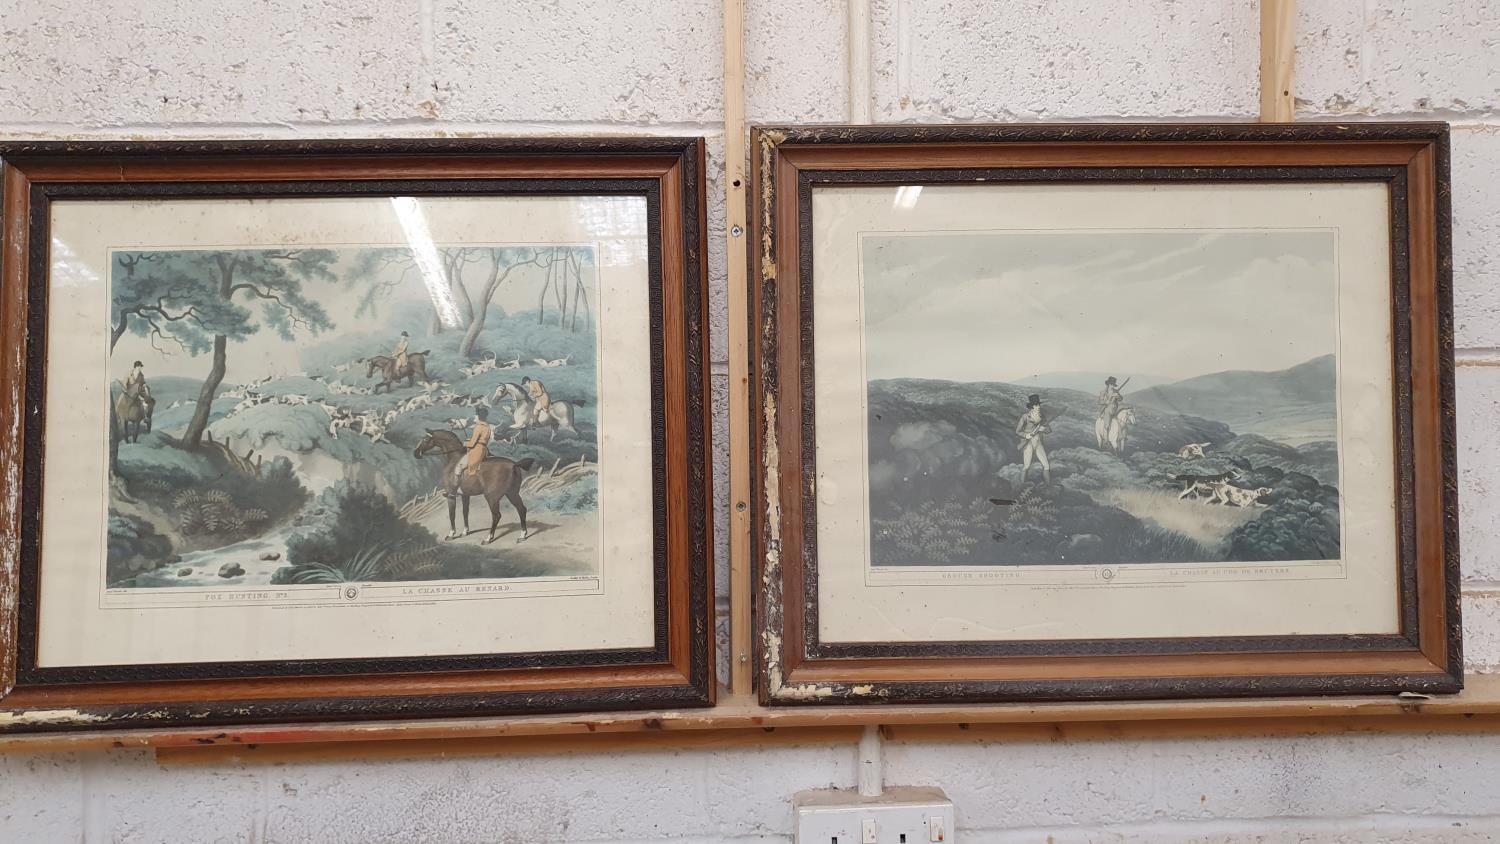 Henry Wilkinson, a pair of limited edition hunting prints, 13/100 and 94/100, 30 x 42 cm, unframed - Image 2 of 2